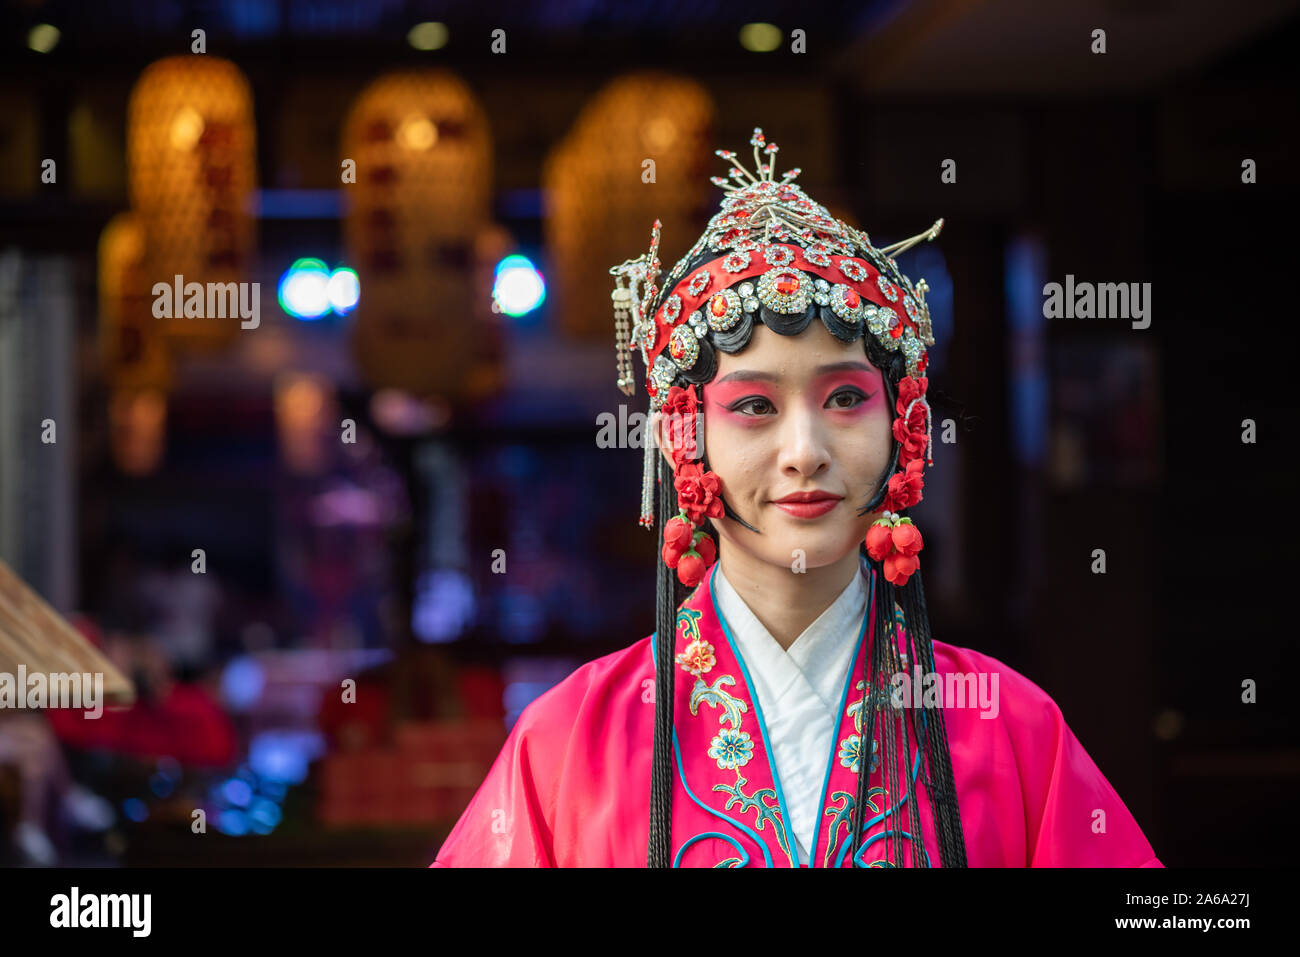 Chengdu, Sichuan Province, China - Oct 11, 2019 : Portrait of a yound woman dressed in Sichuan Opera traditional costume in Jinli street touristic area. Stock Photo